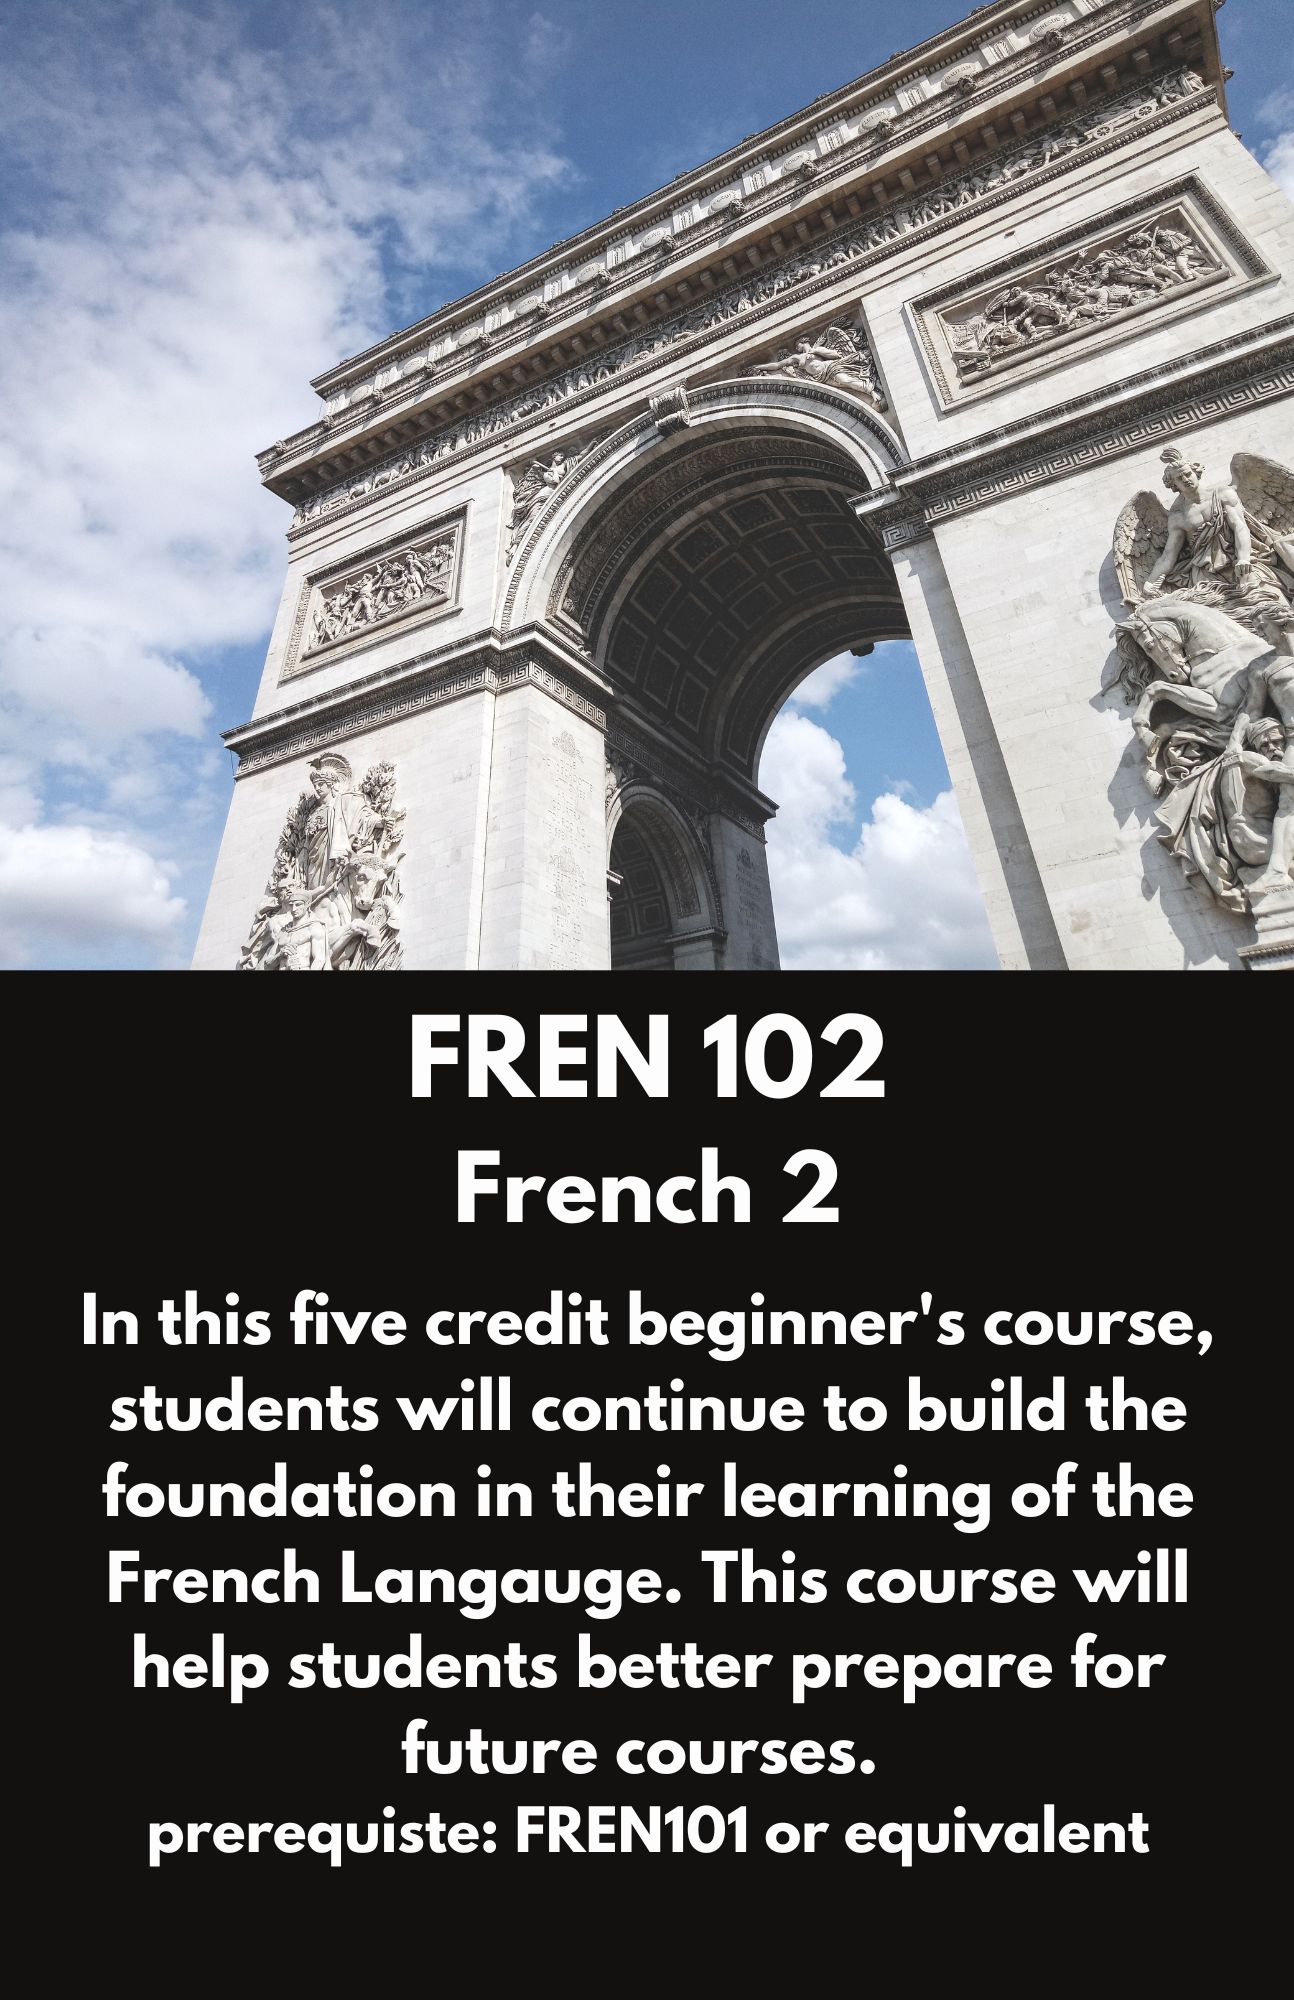 FREN 102  French 2. In this five credit beginner's course, students will continue to build the foundation in their learning of the French Langauge. This course will help students better prepare for future courses.  prerequiste: FREN101 or equivalent